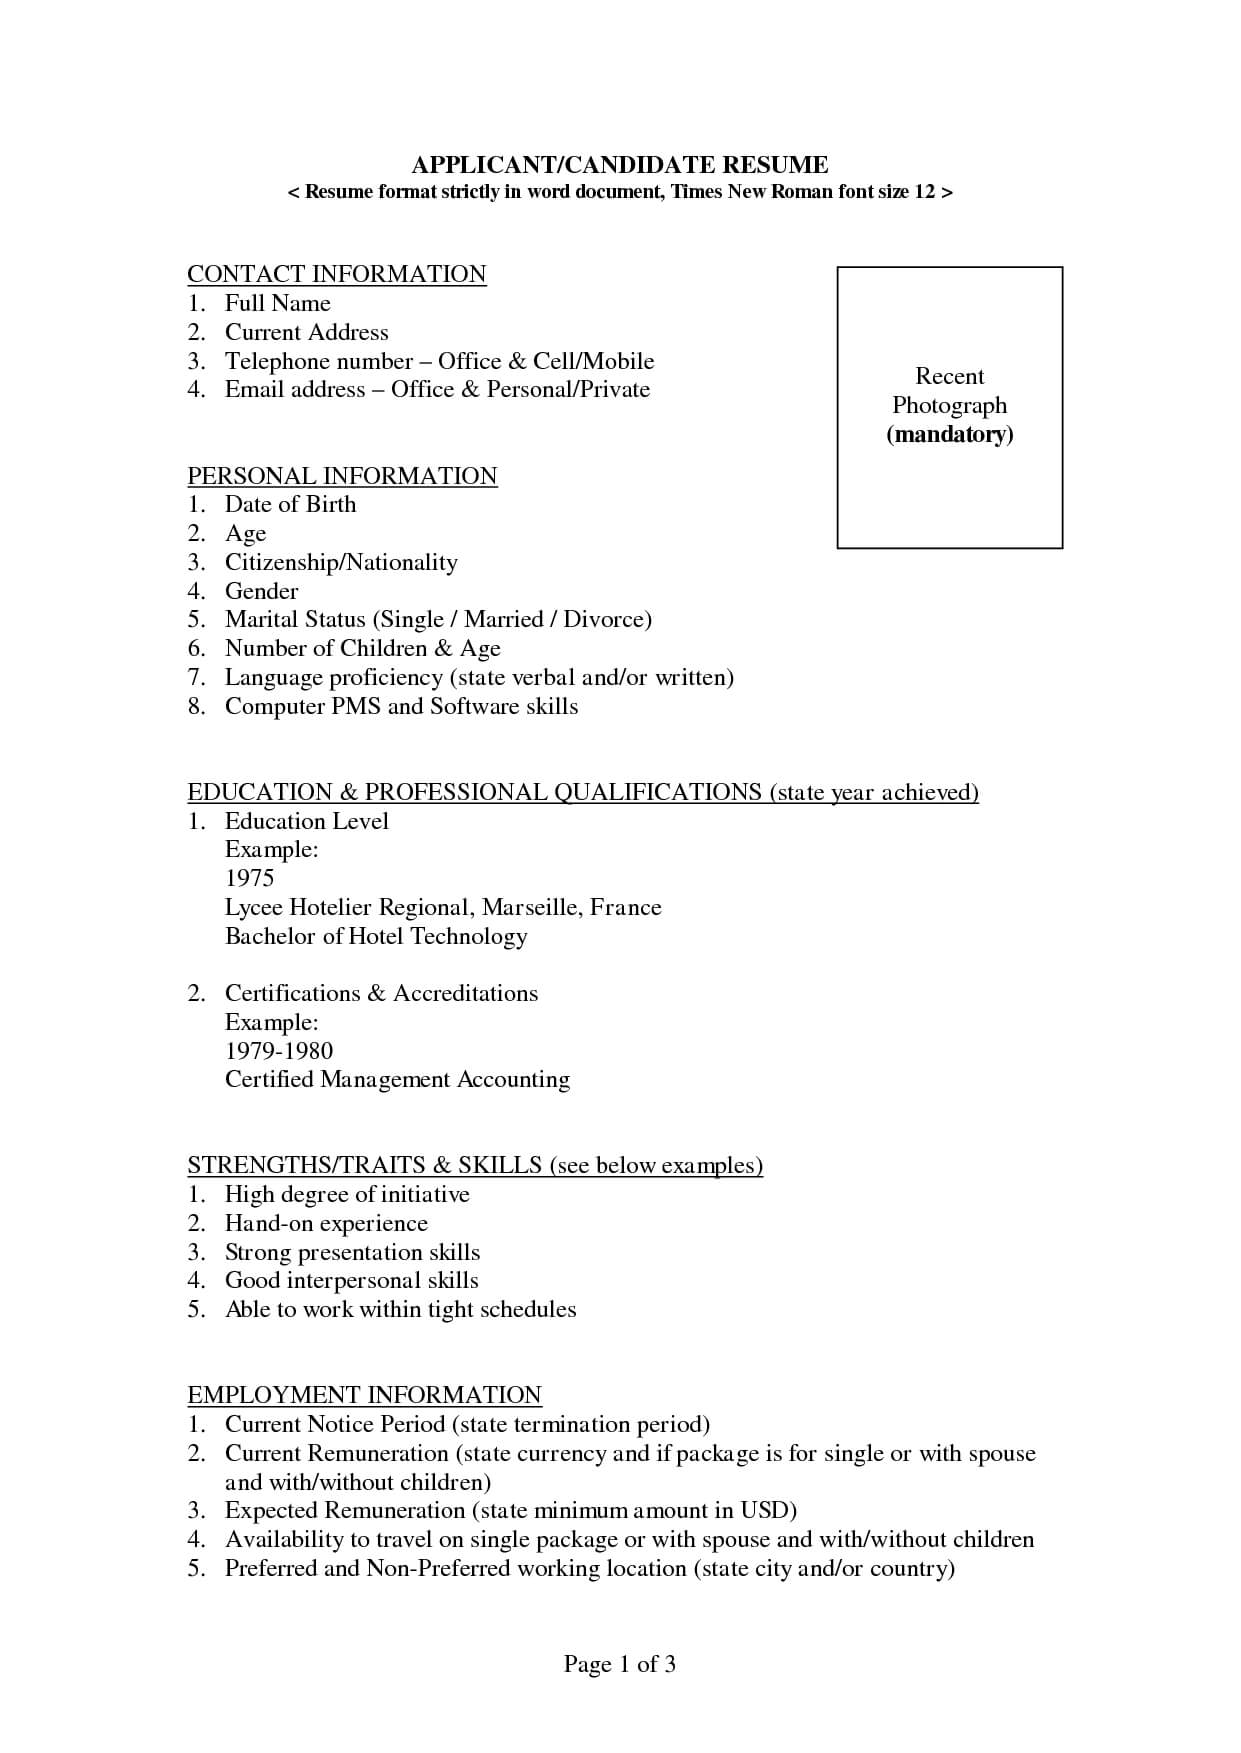 Resume Format Download In Ms Word Microsoft Word Resume For How To Get A Resume Template On Word